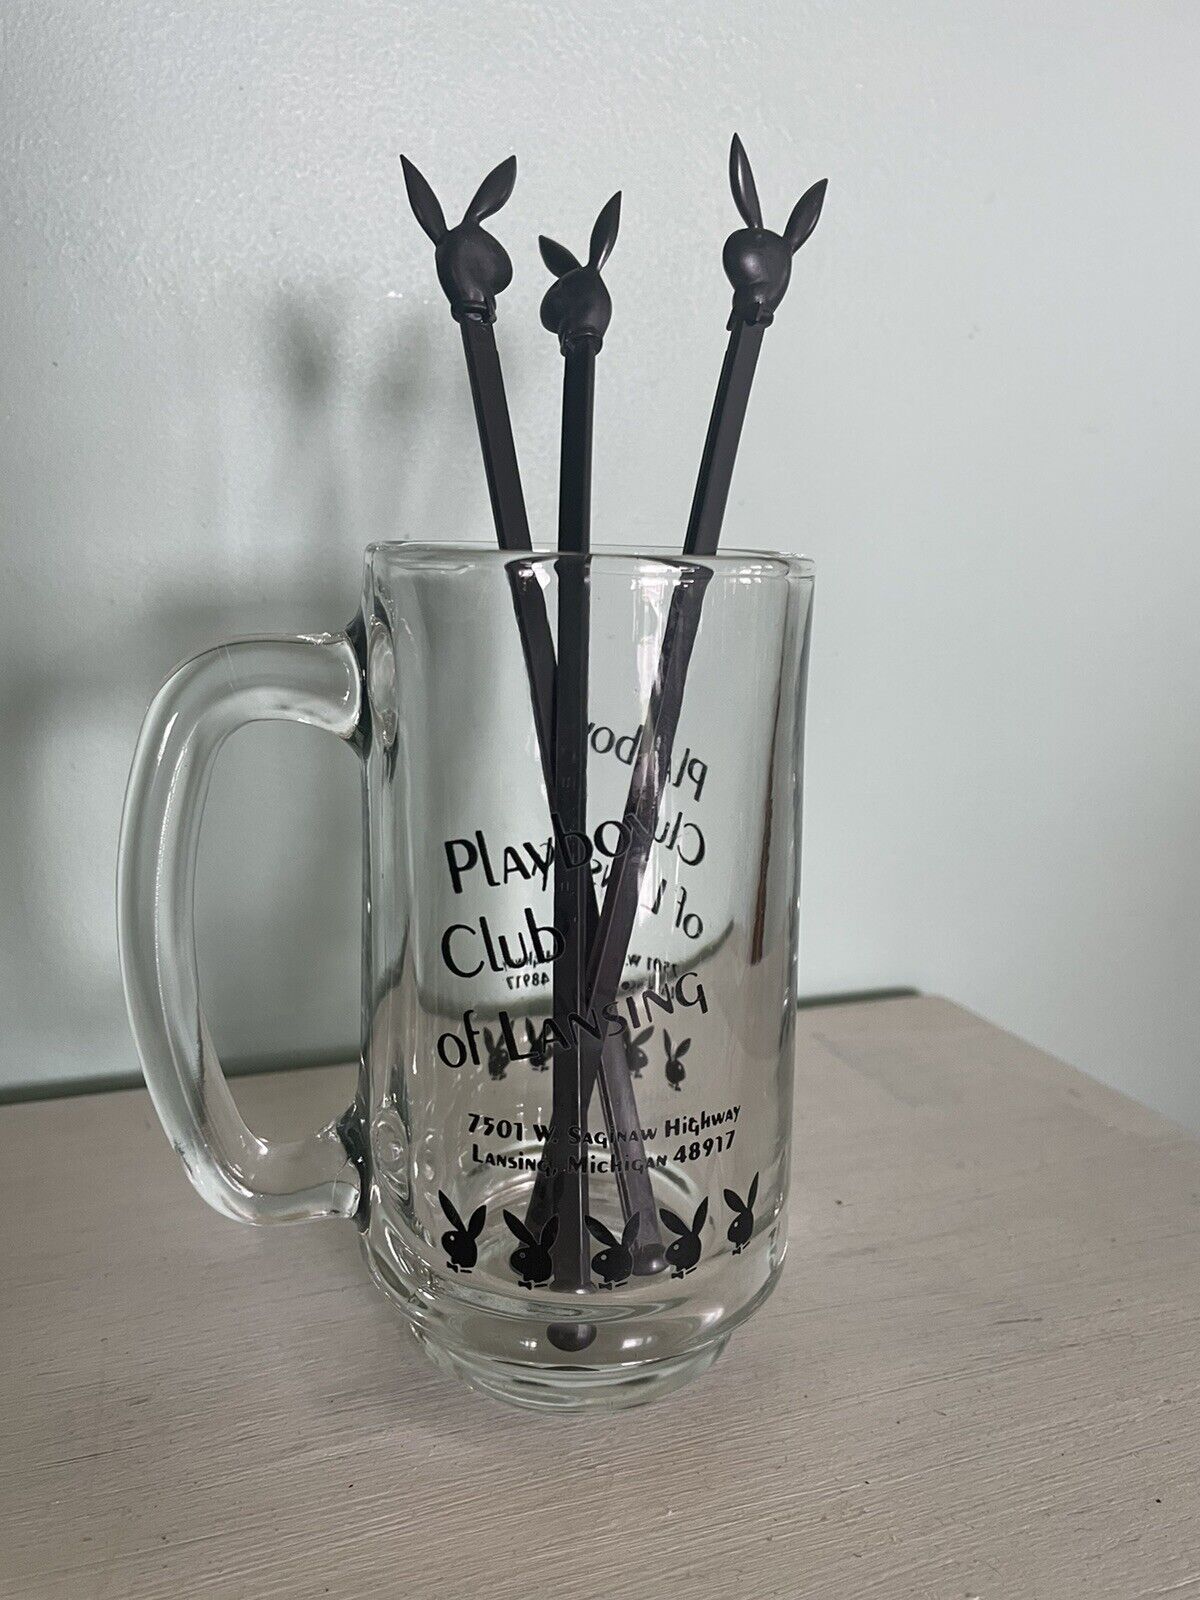 Playboy Club Of Lansing Michigan, ClearGlass Beer Stein With 3 Bunny Stirrers